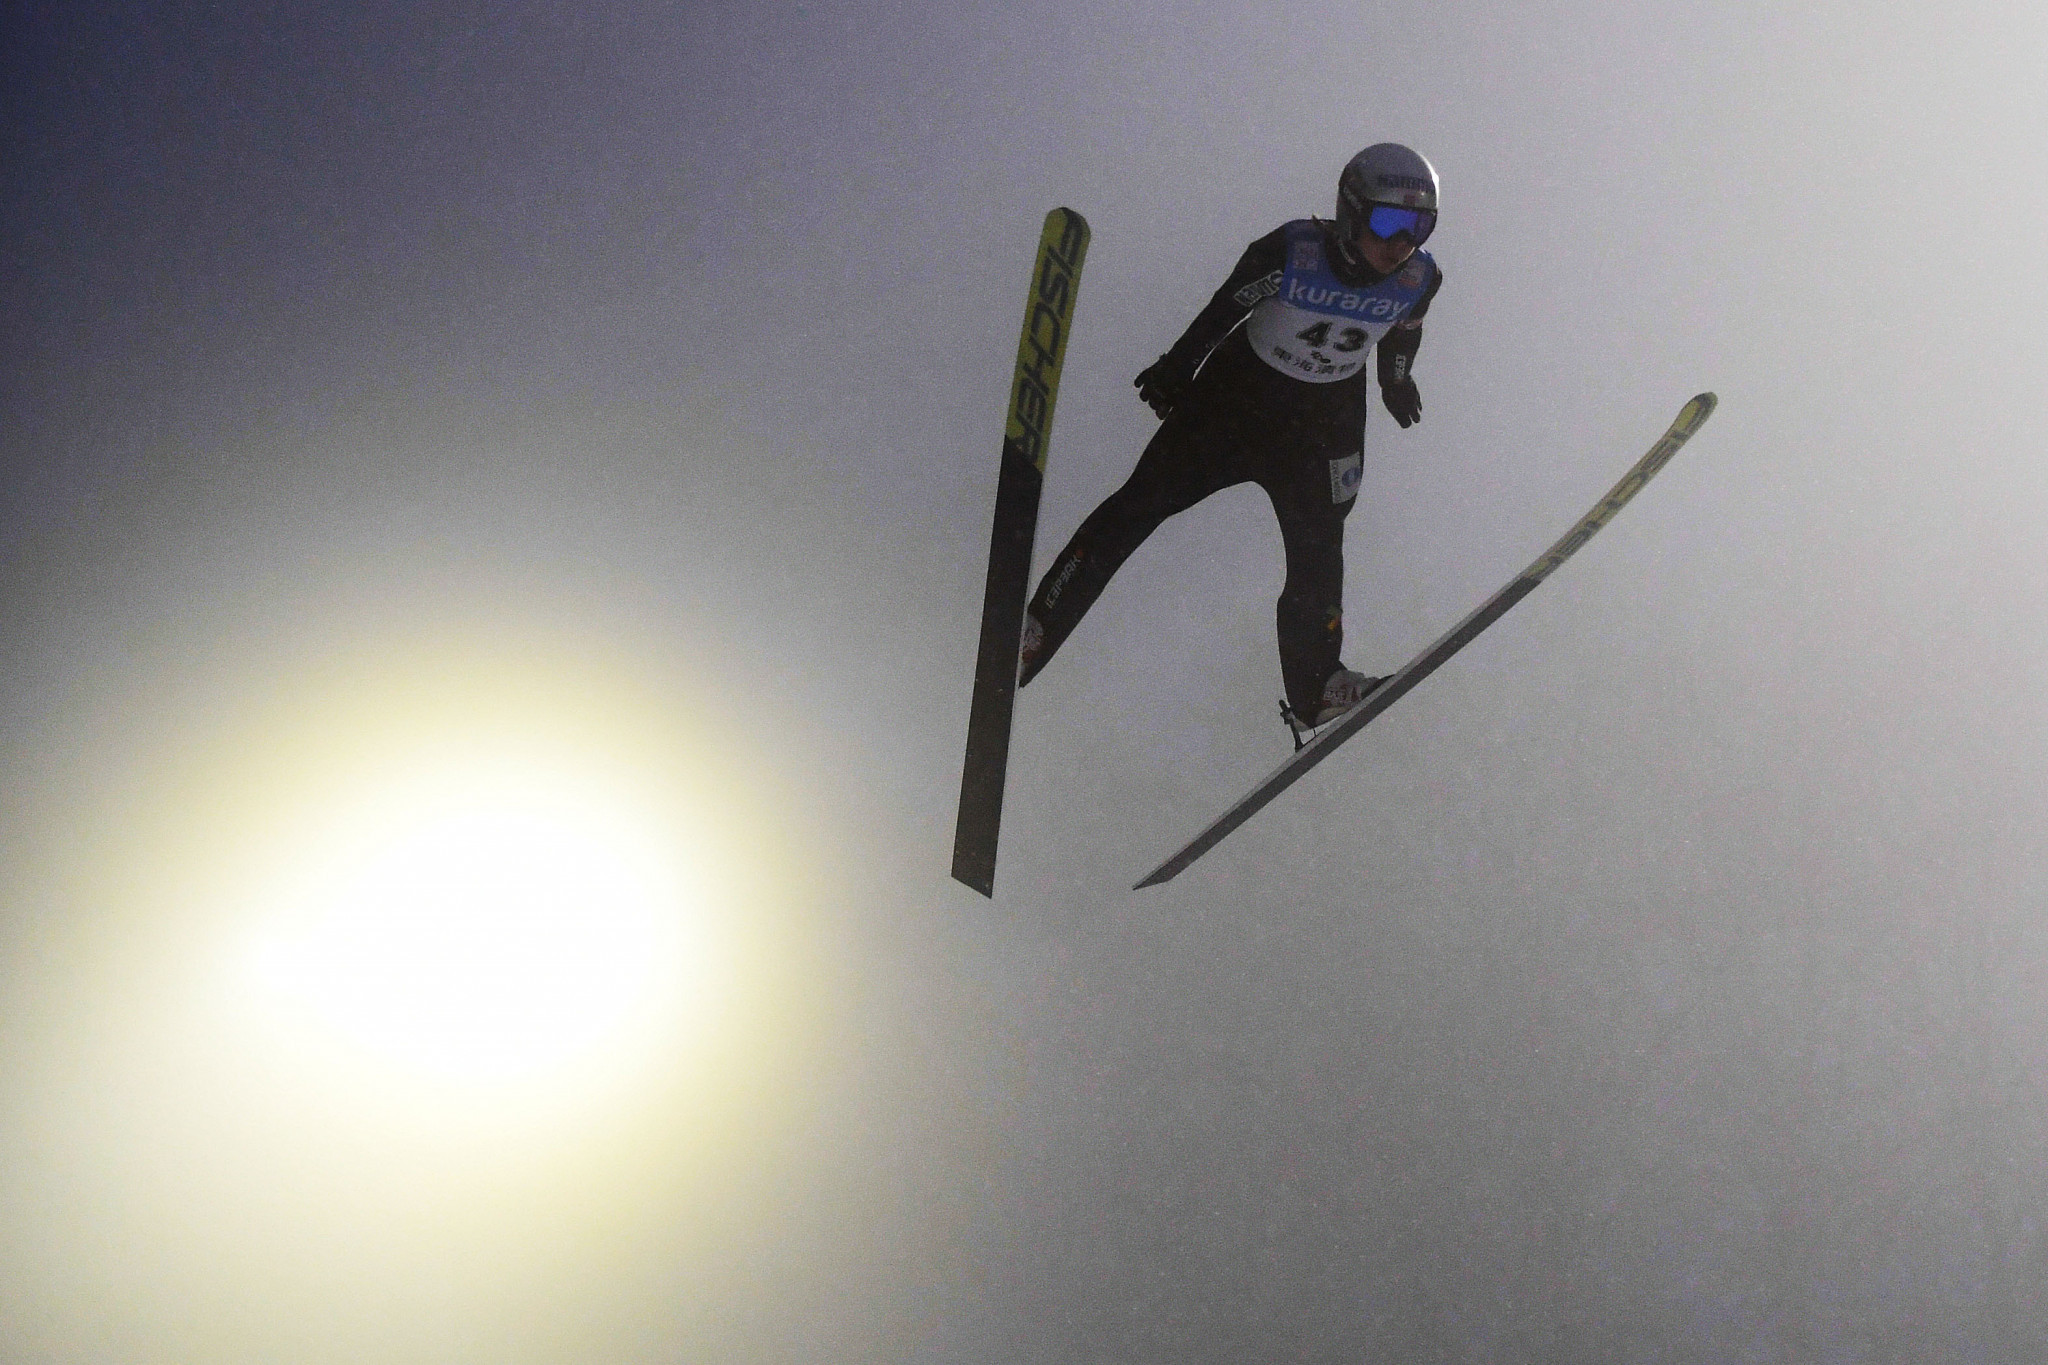 Maren Lundby topped qualifying at the women's event in Hizenbach ©Getty Images